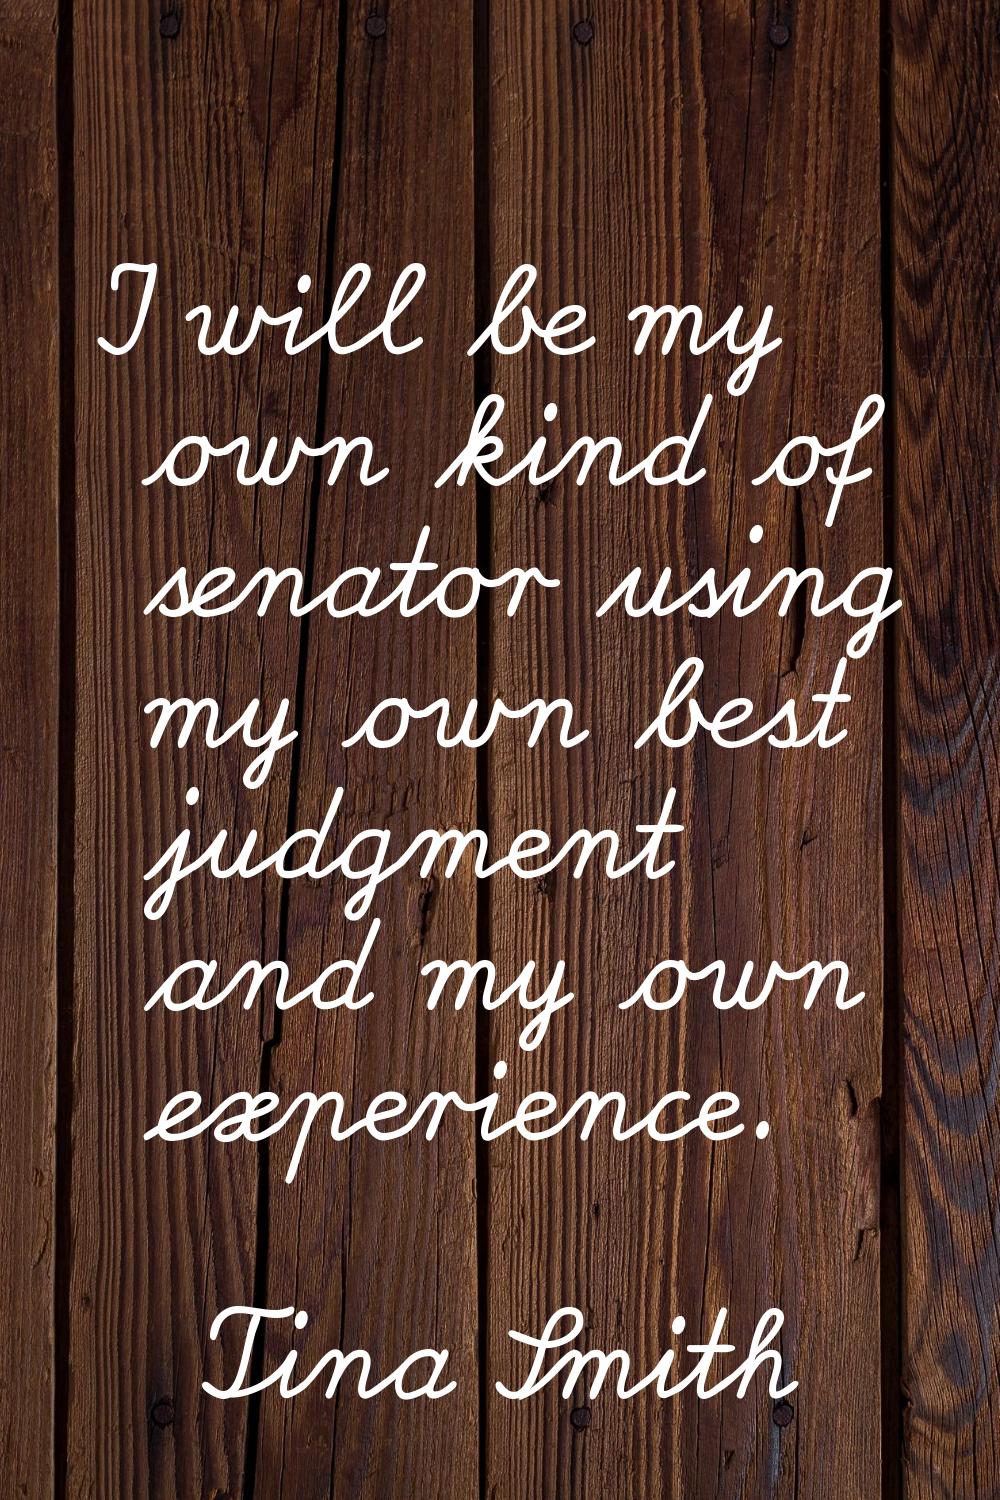 I will be my own kind of senator using my own best judgment and my own experience.